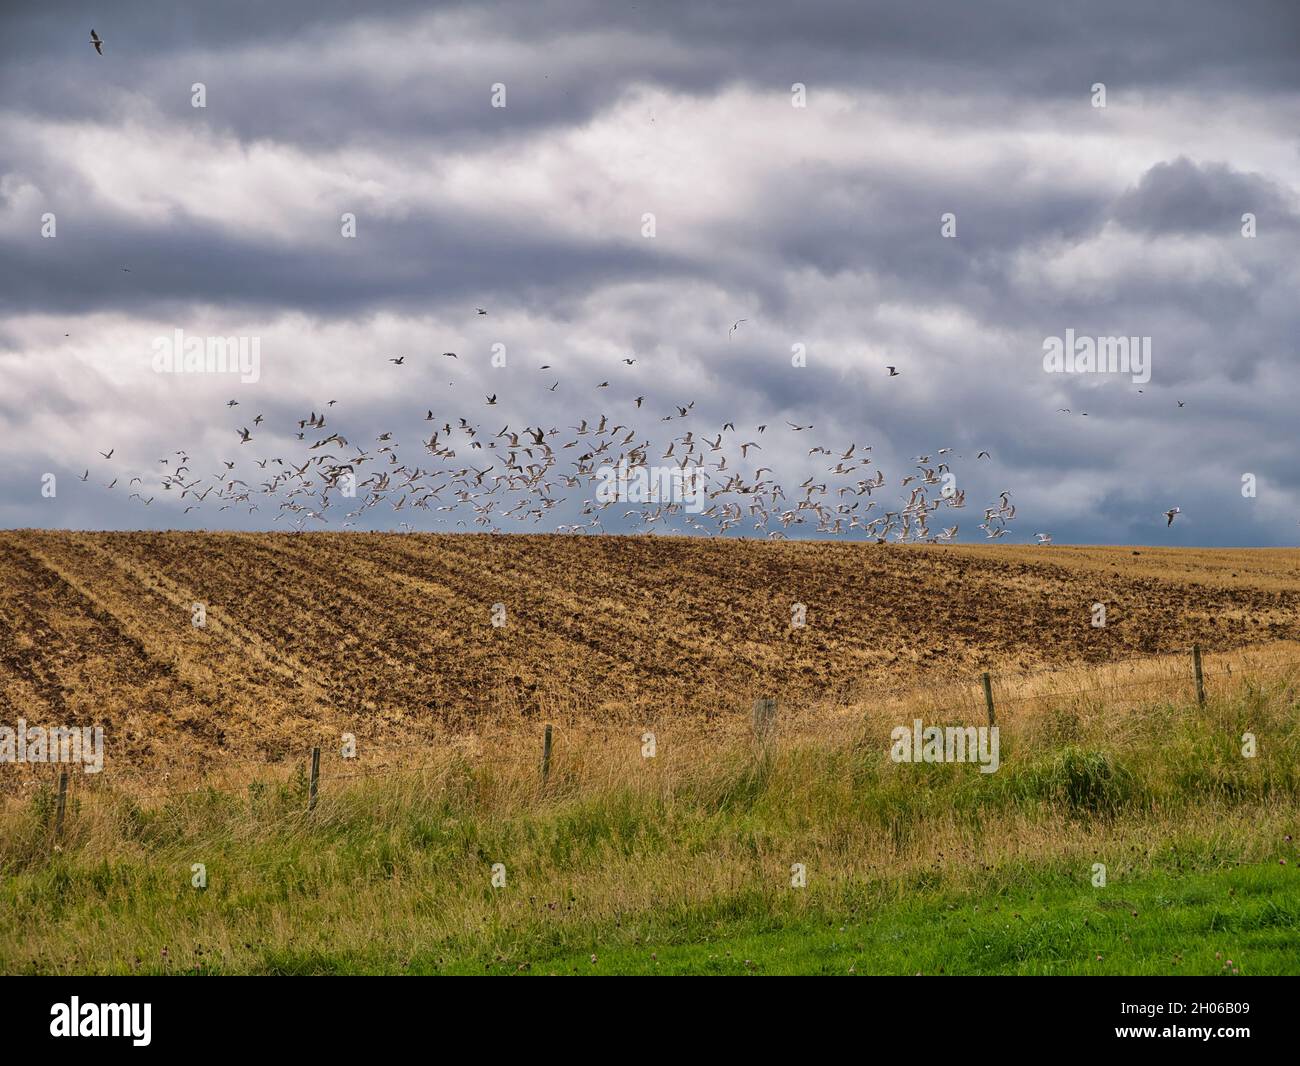 A flock of gulls rise from feeding in a ploughed field after being disturbed by walkers on a nearby path - taken on a cloudy day Stock Photo